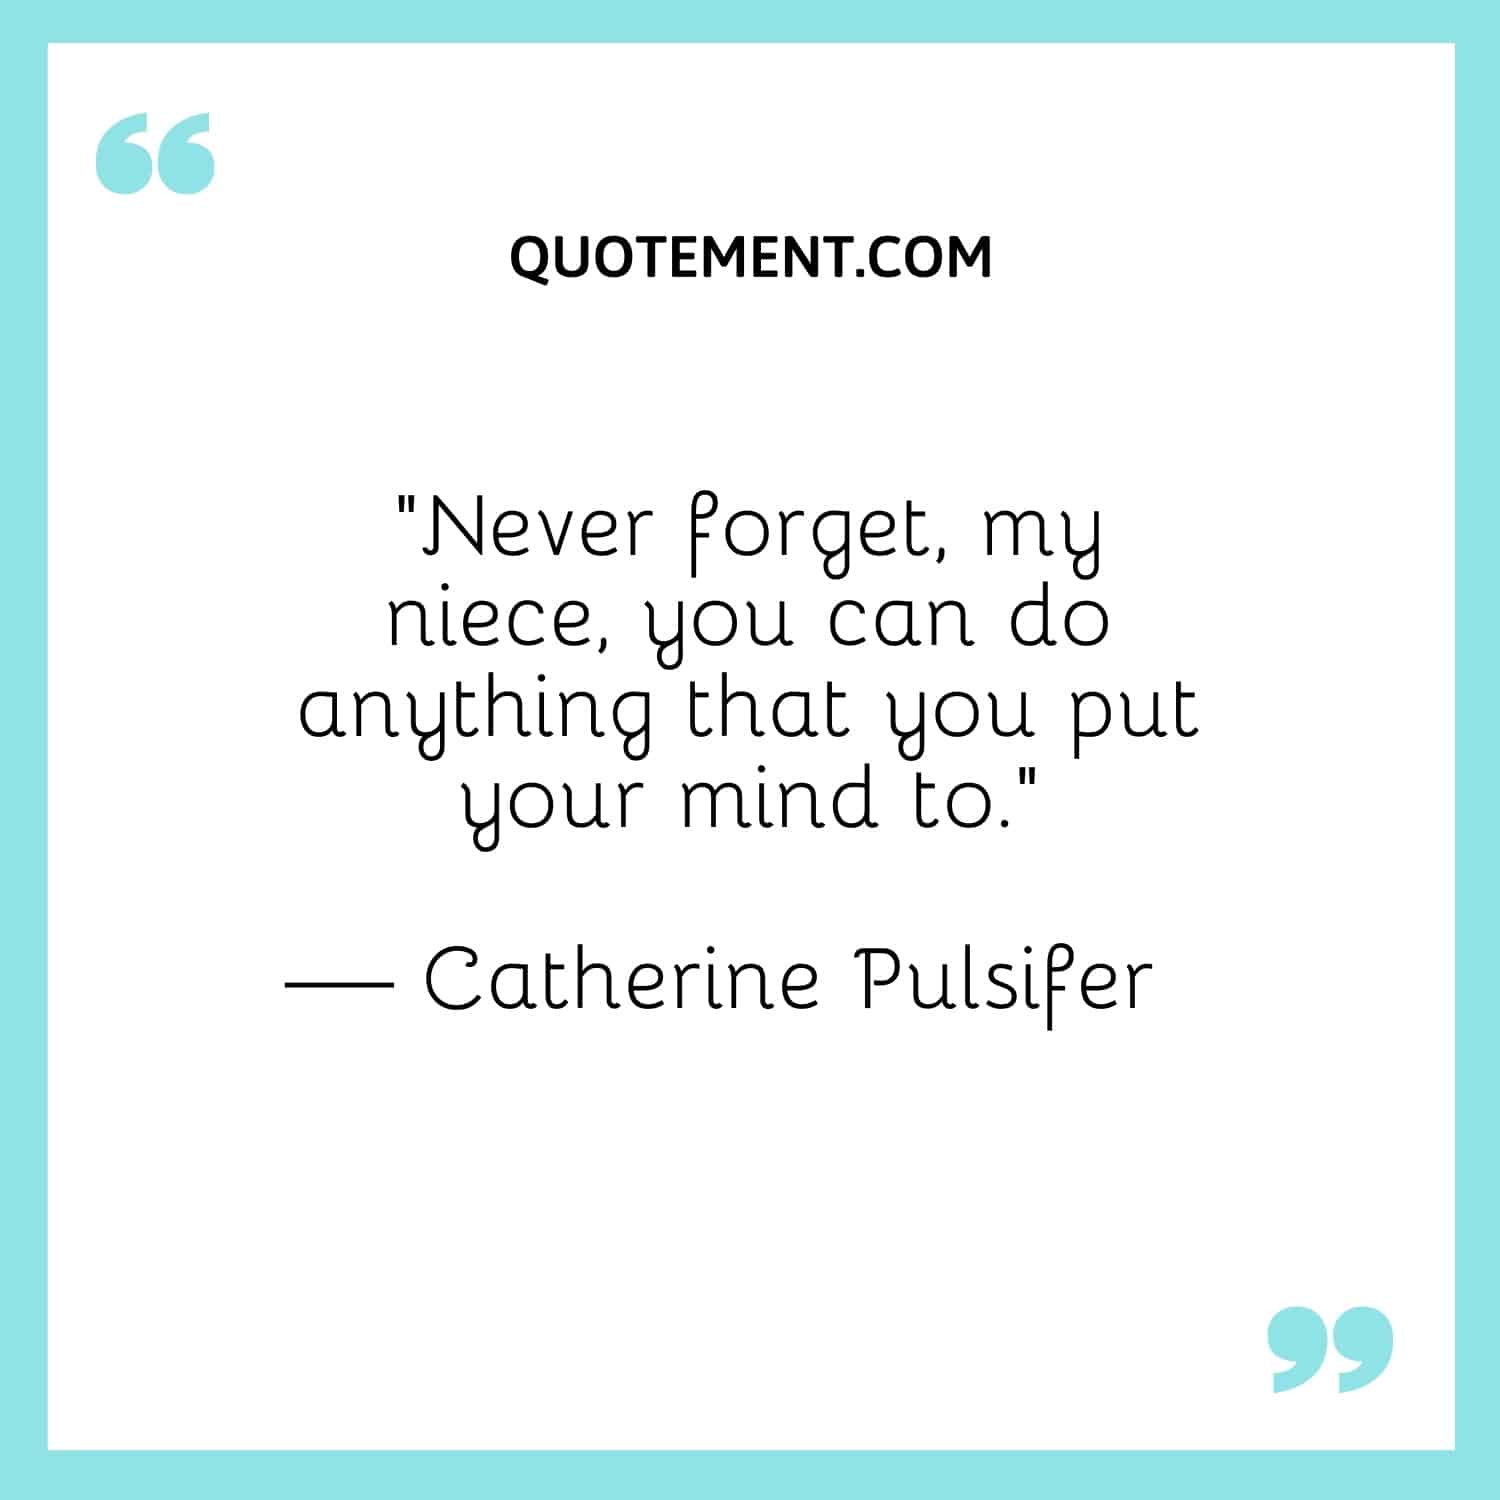 “Never forget, my niece, you can do anything that you put your mind to.”  — Catherine Pulsifer